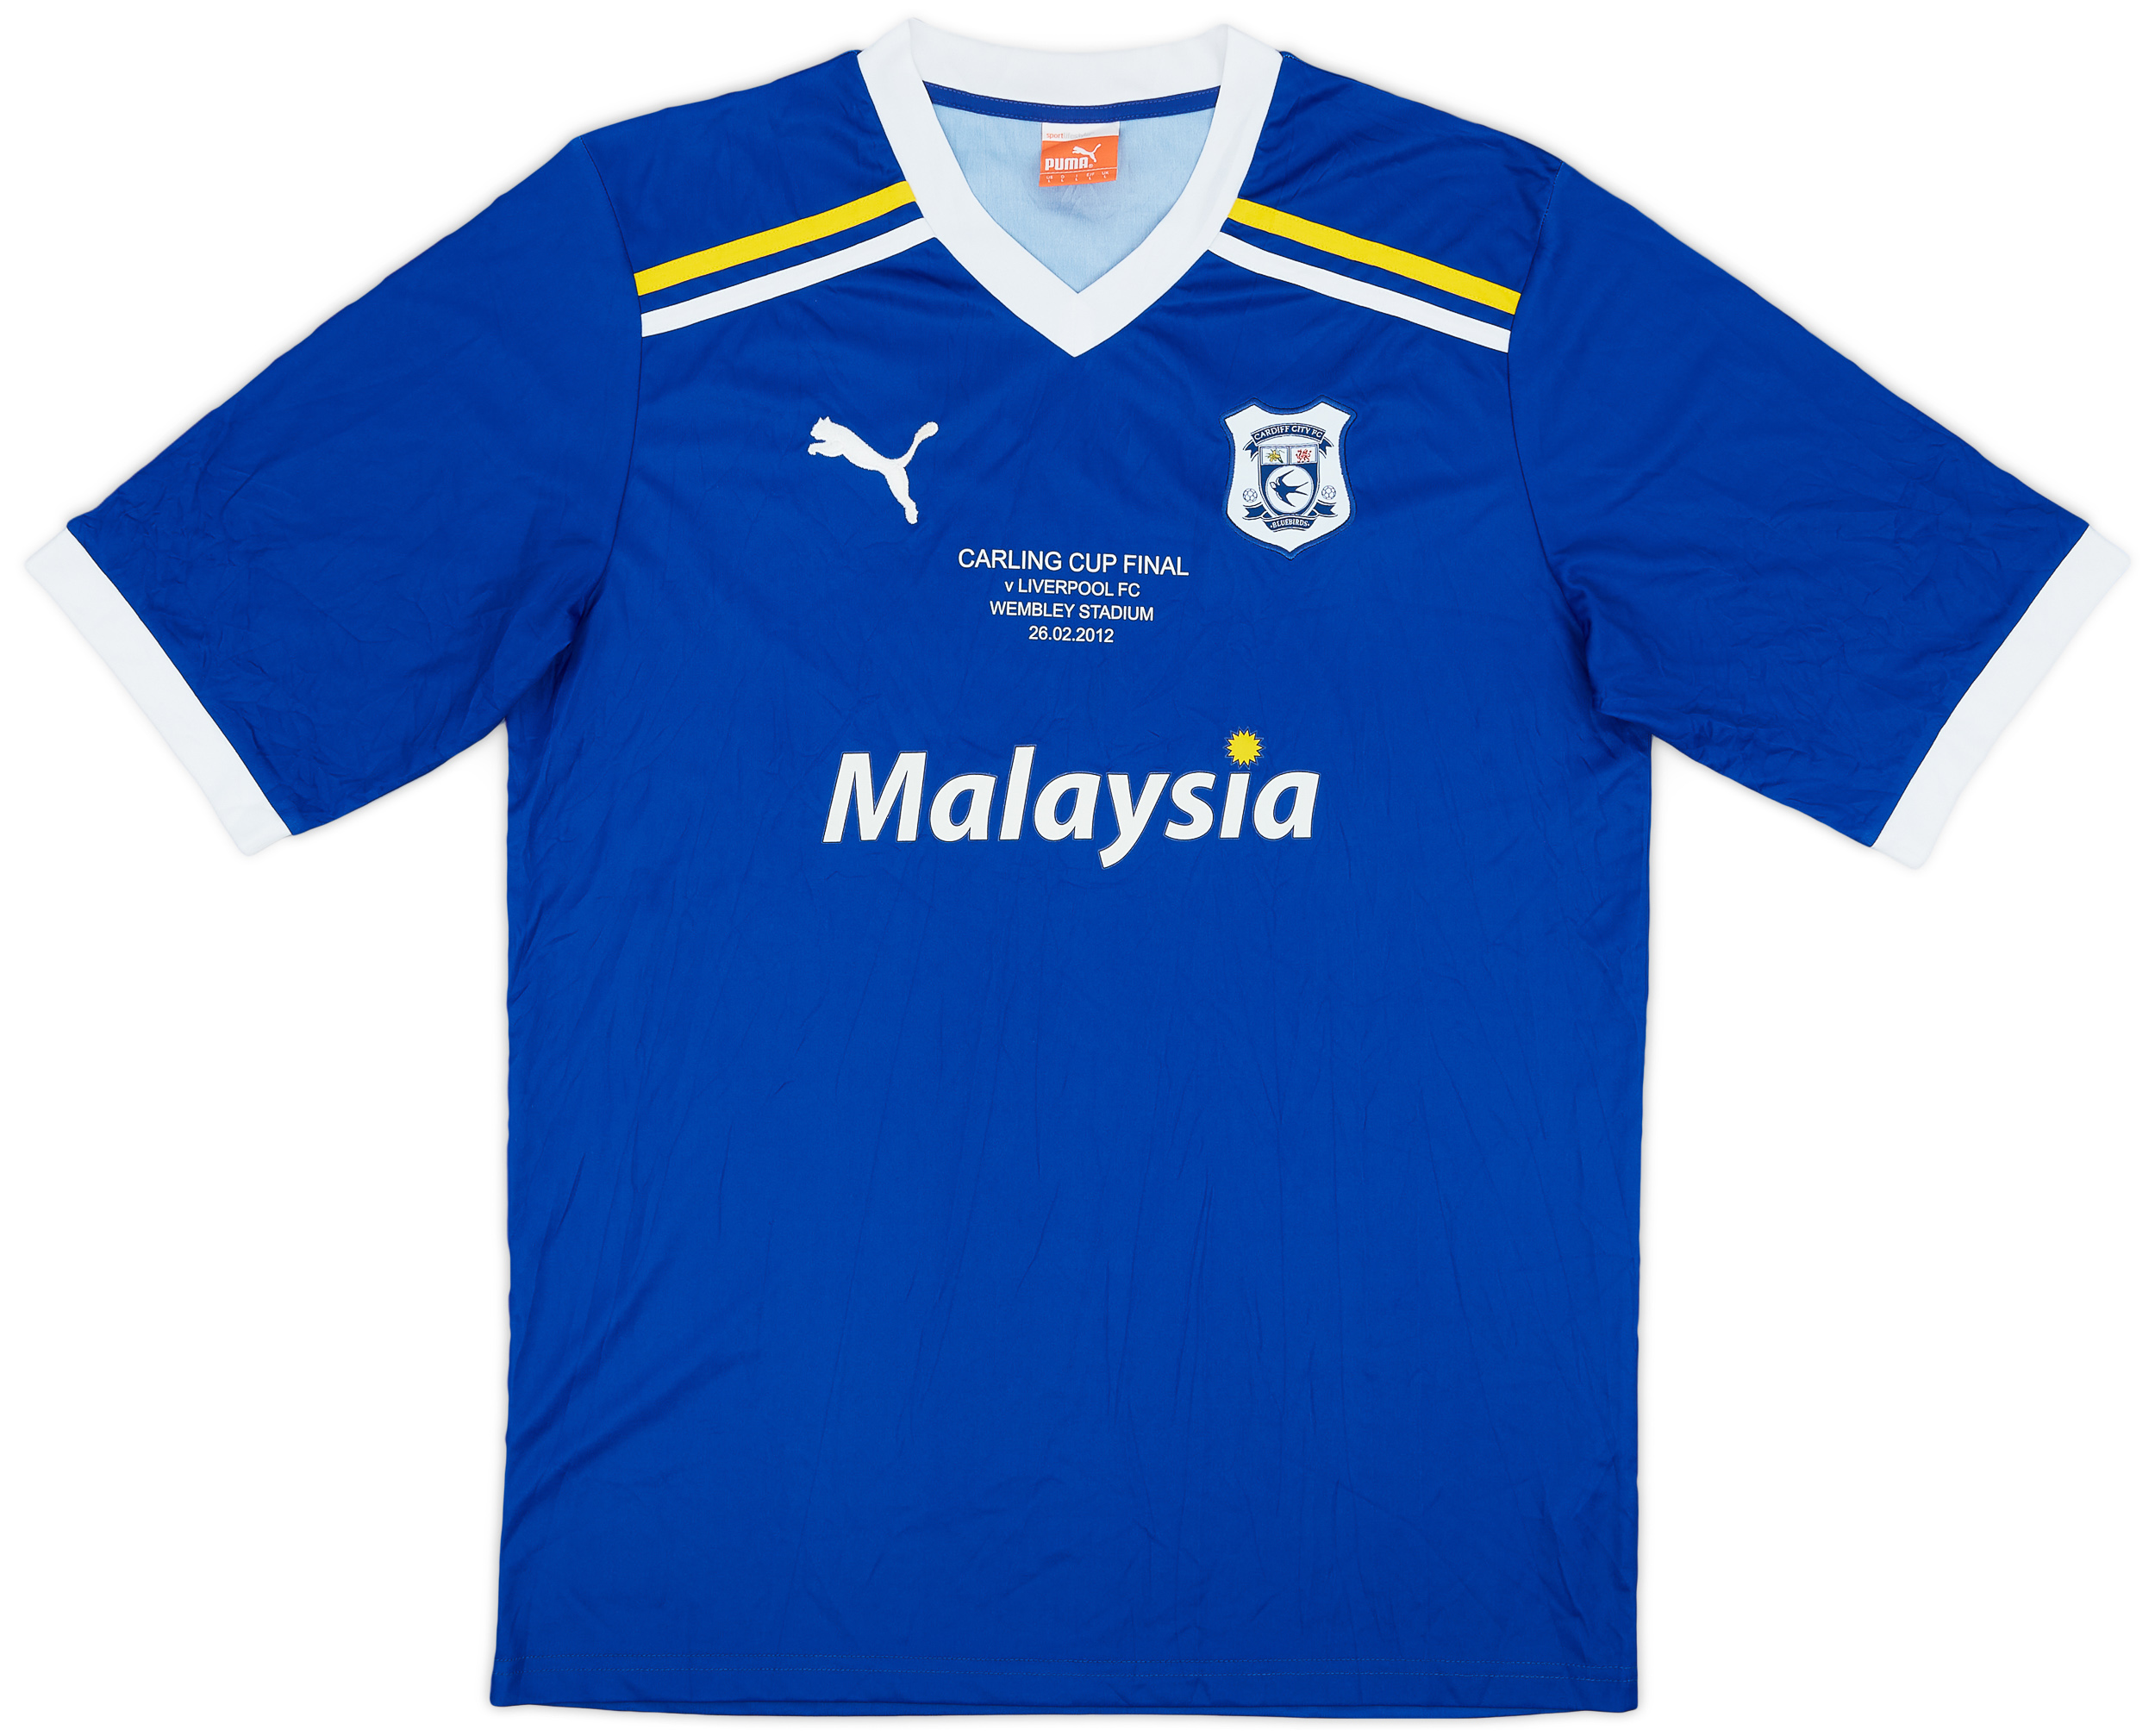 2011-12 Cardiff City 'Carling Cup Final' Home Shirt - 9/10 - ()